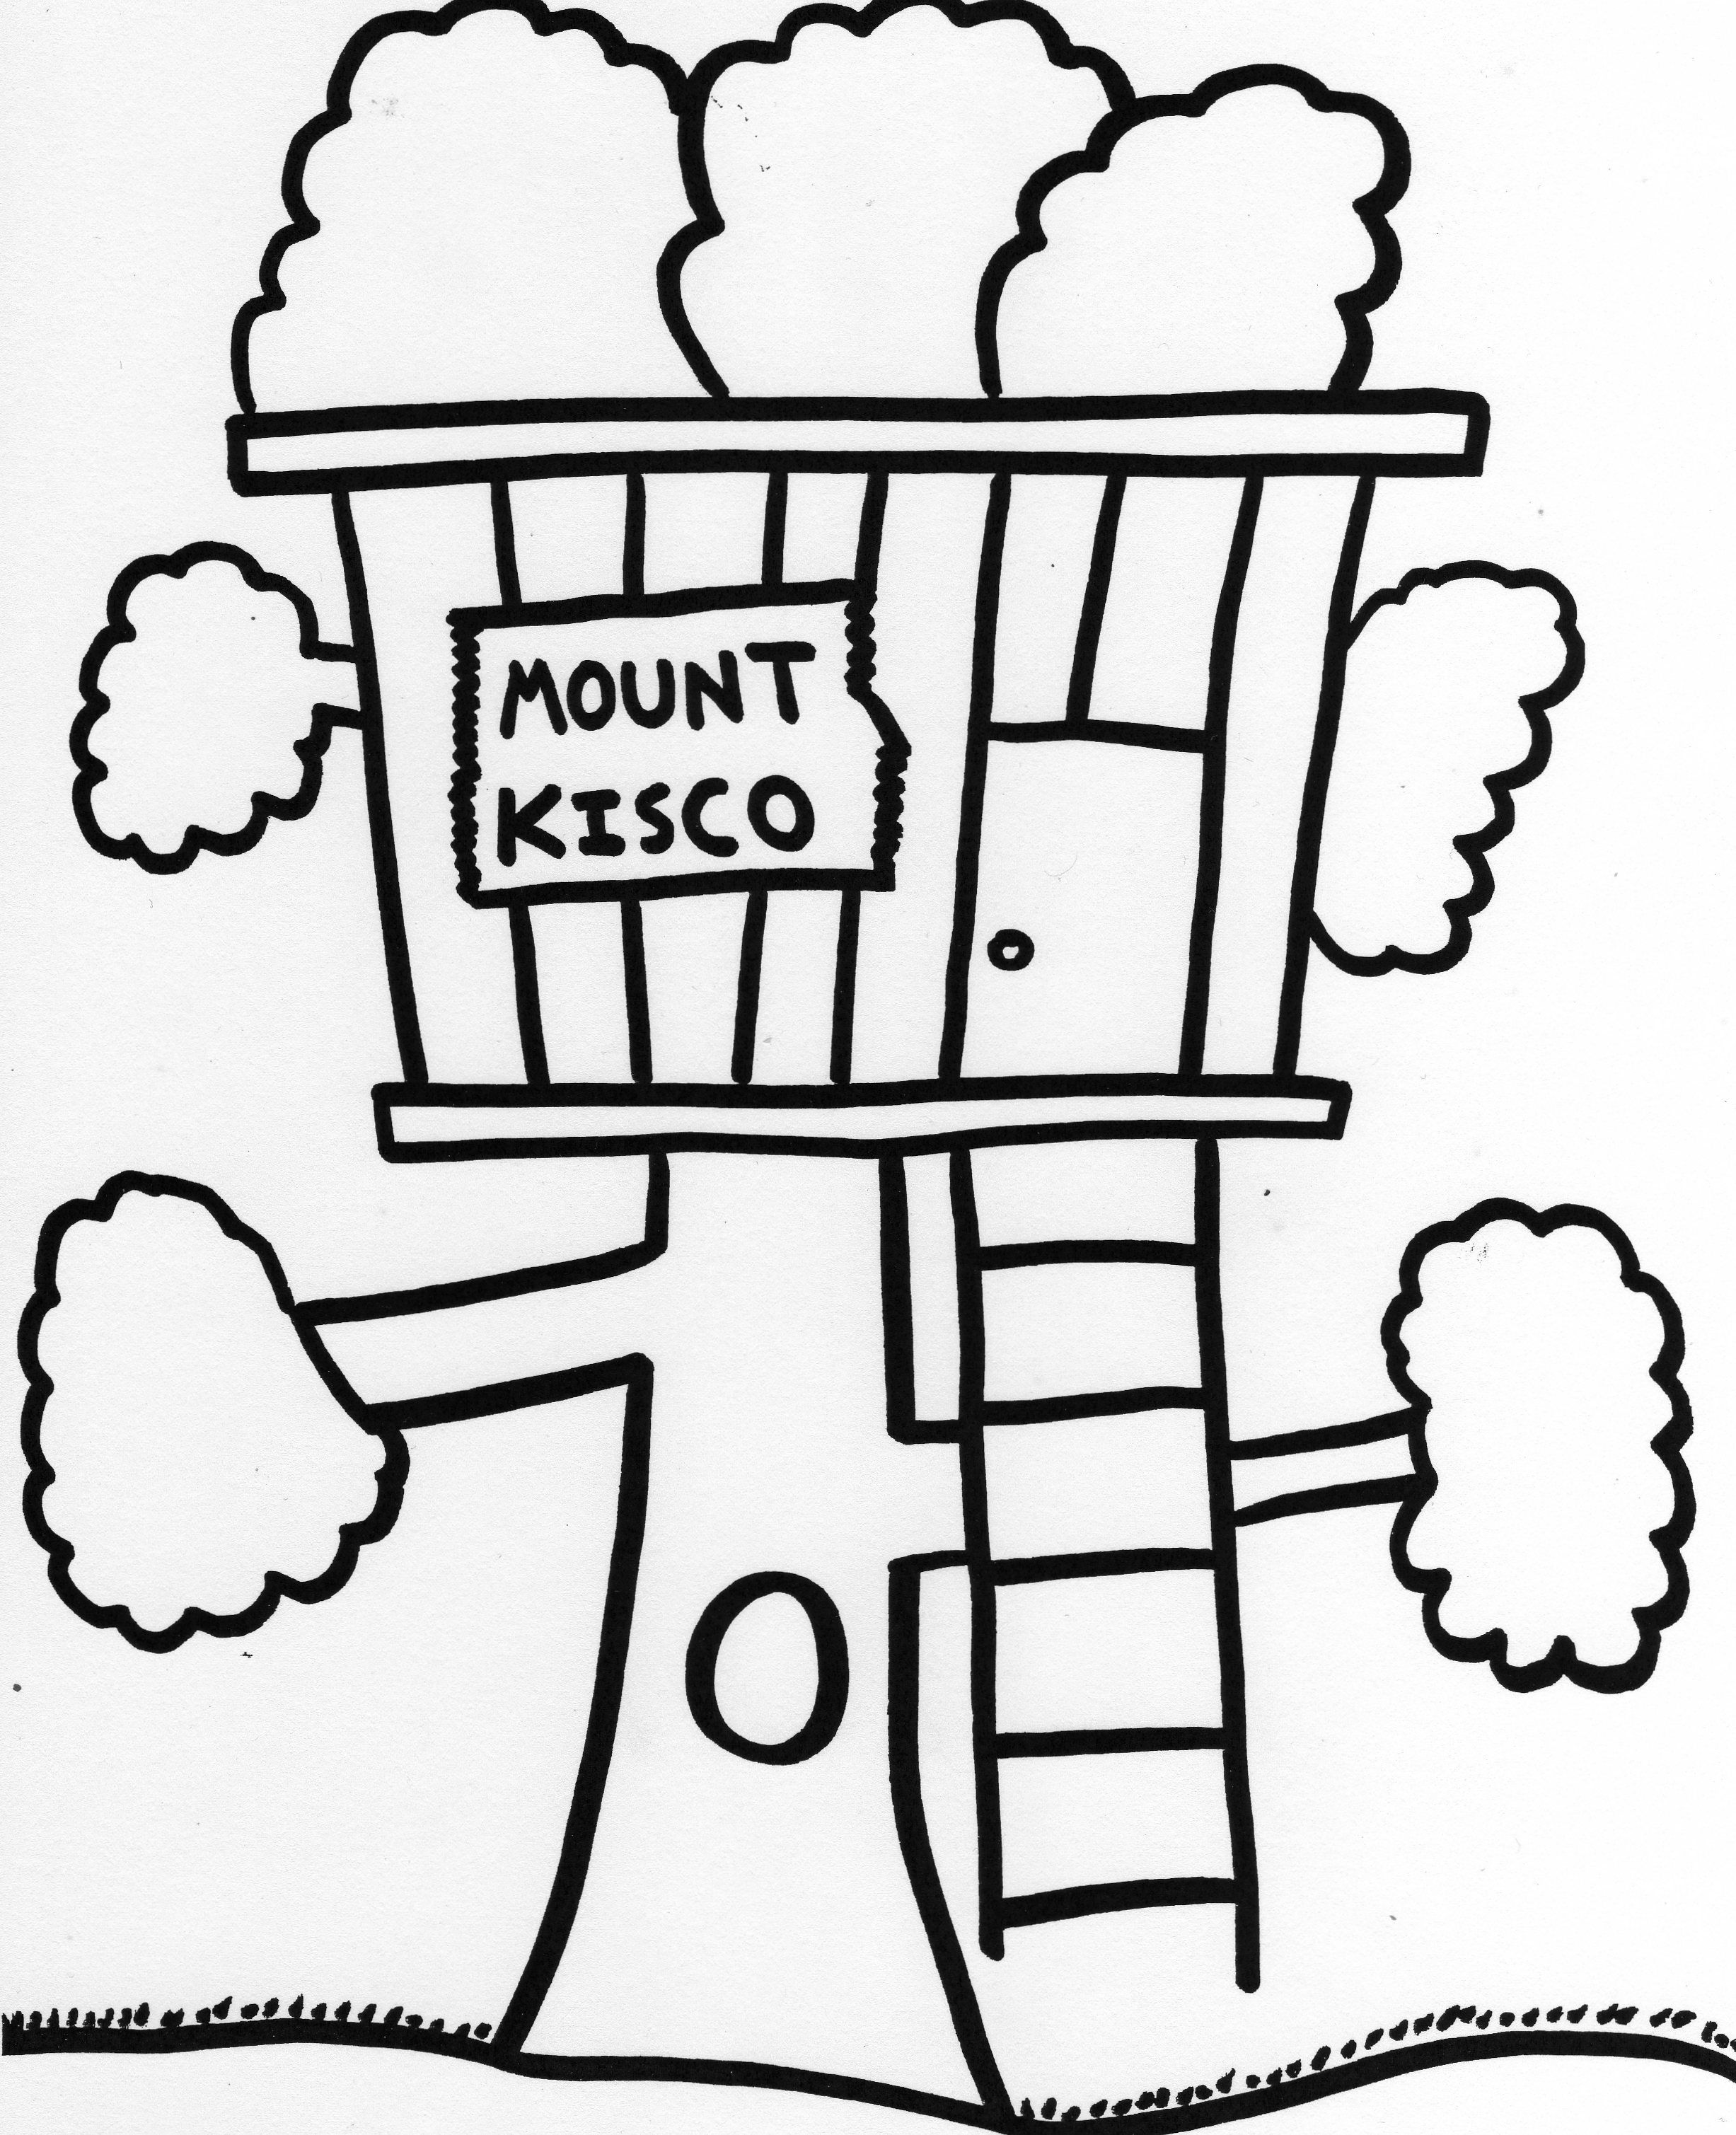 Free Tree House Coloring Pages - Coloring Home